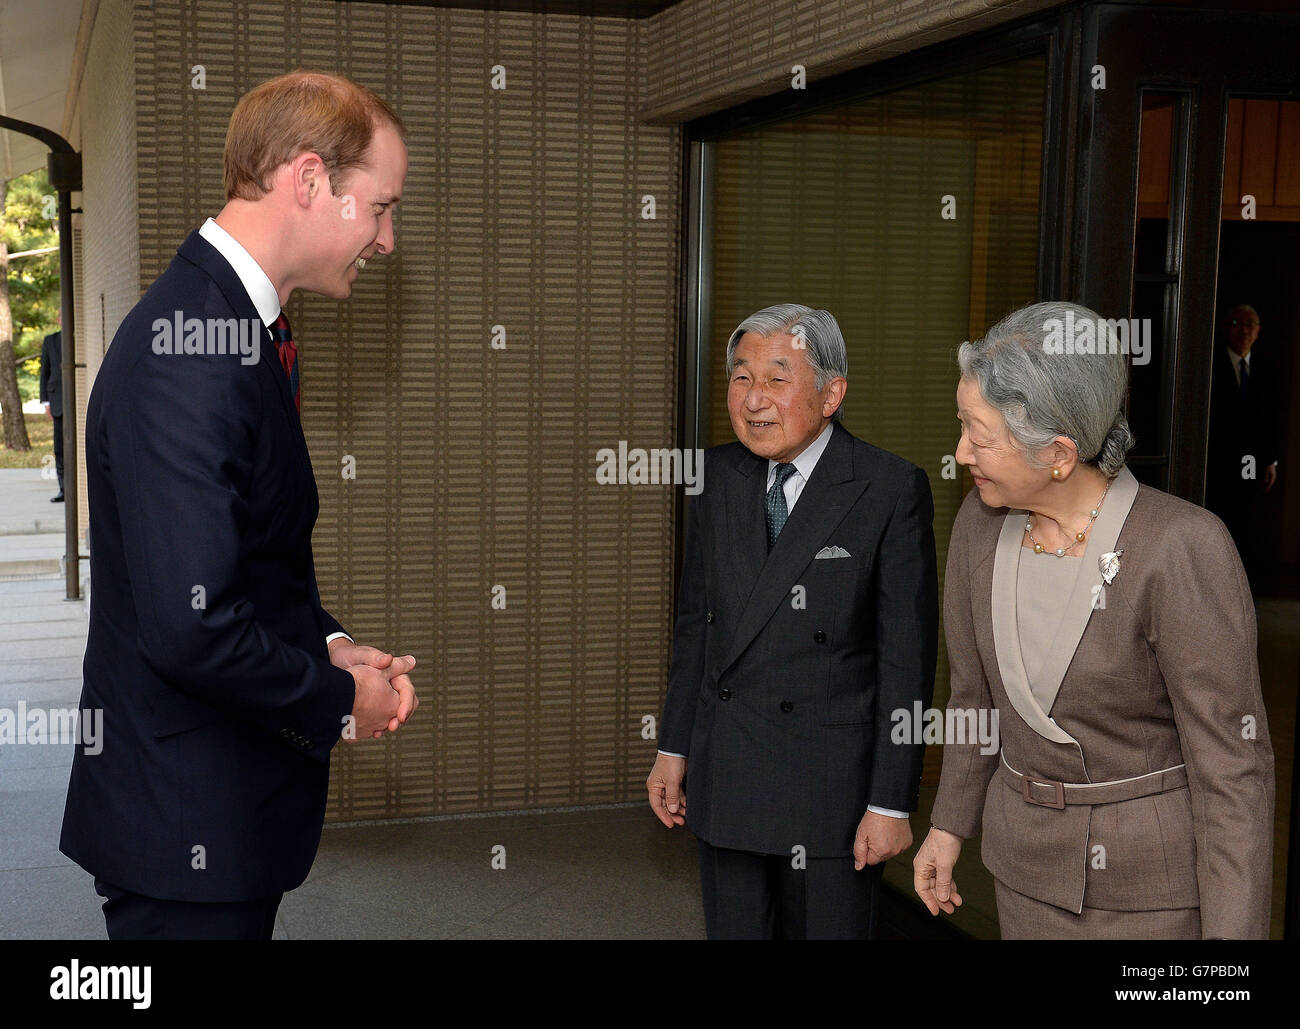 The Duke of Cambridge with Emperor Akihito and Empress Michiko, after he arrived for lunch at the couple's residence within the Royal Palace grounds in central Tokyo, during the second day of his trip to Japan. Stock Photo